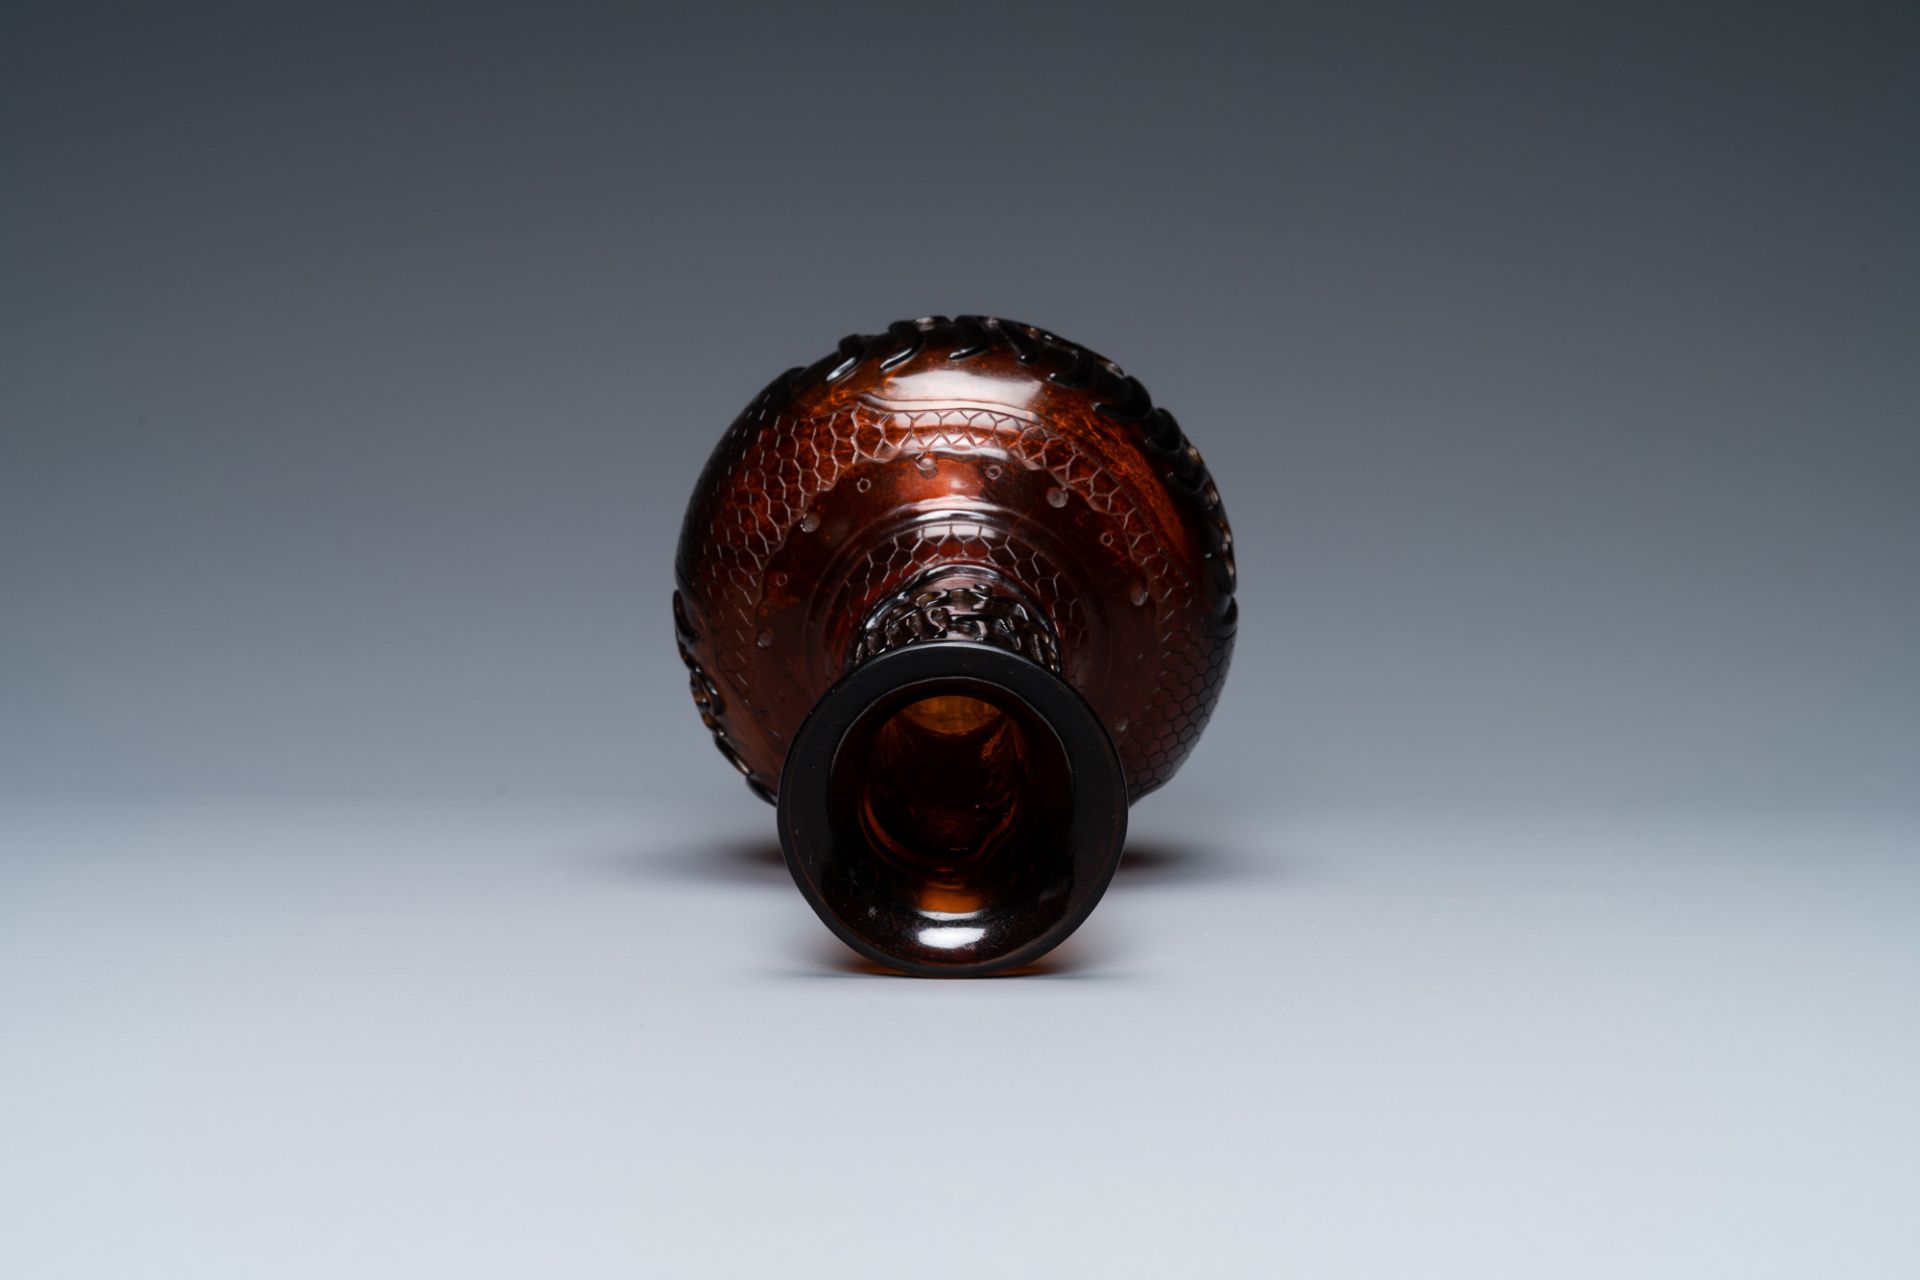 A Chinese Islamic market Beijing glass vase inscribed 'Allah' and 'Muhammad the Prophet', 18/19th C. - Image 9 of 10